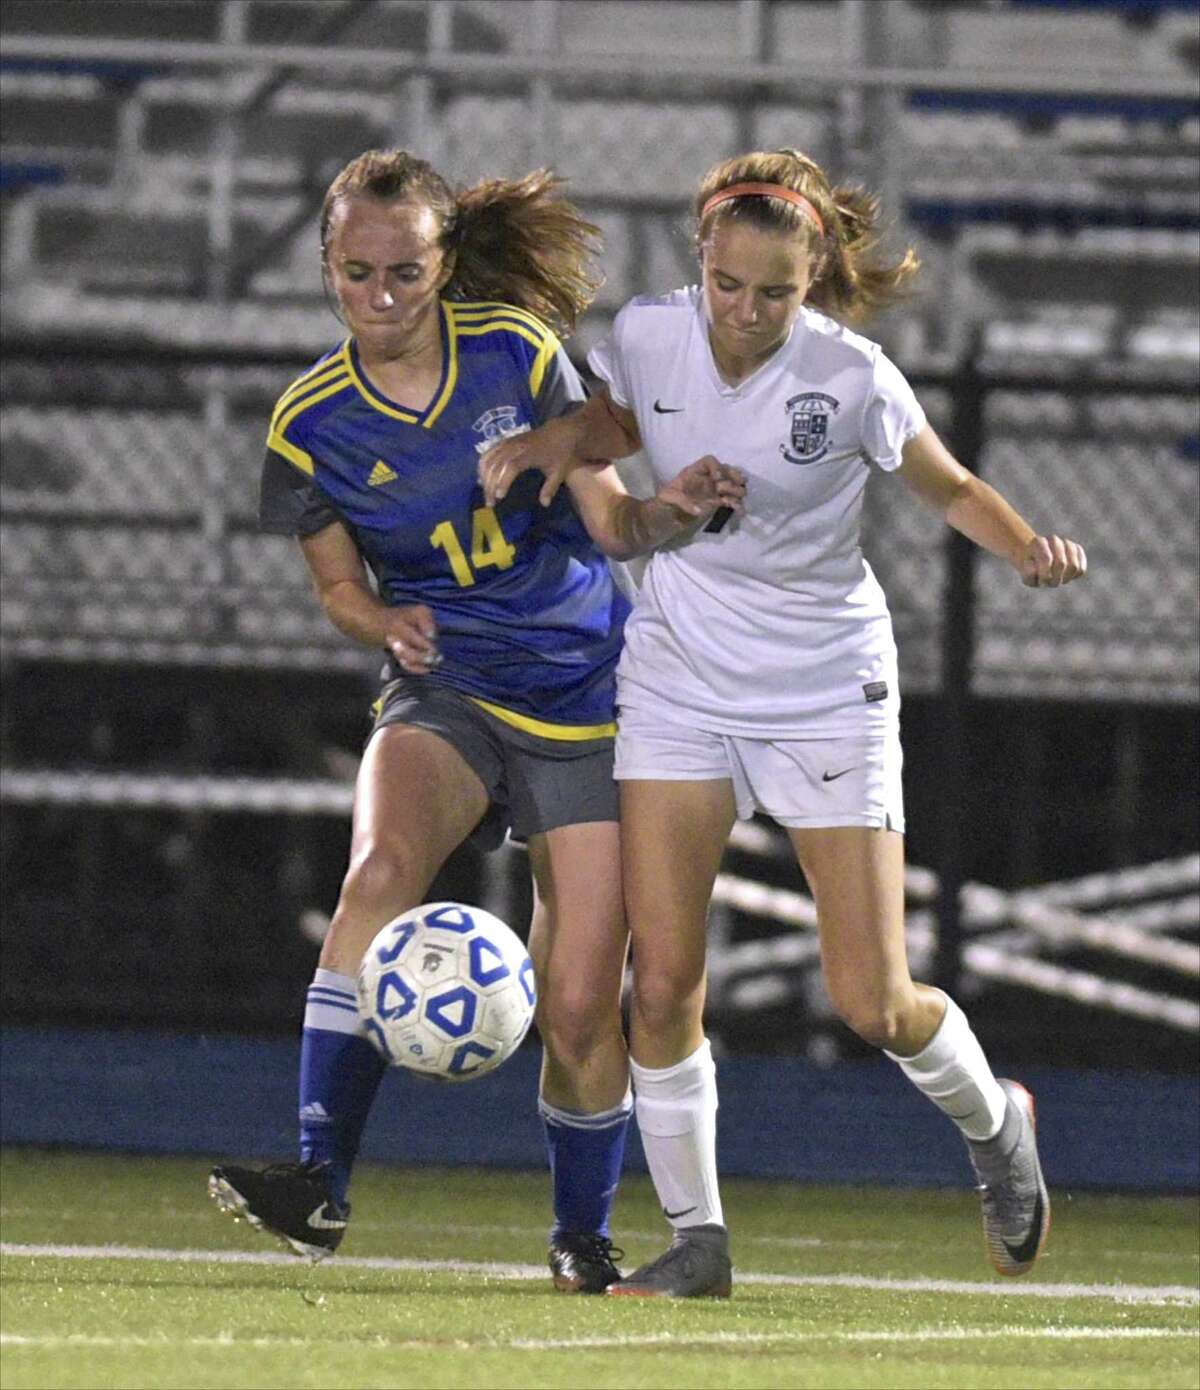 Newtown's Faith O'Hara (14) and Immaculate's Maddie Bourque (7) fight for the ball in the girls soccer game between Immaculate and Newtown high schools, Tuesday night, October 9, 2018 at Newtown High School, Newtown, Conn.